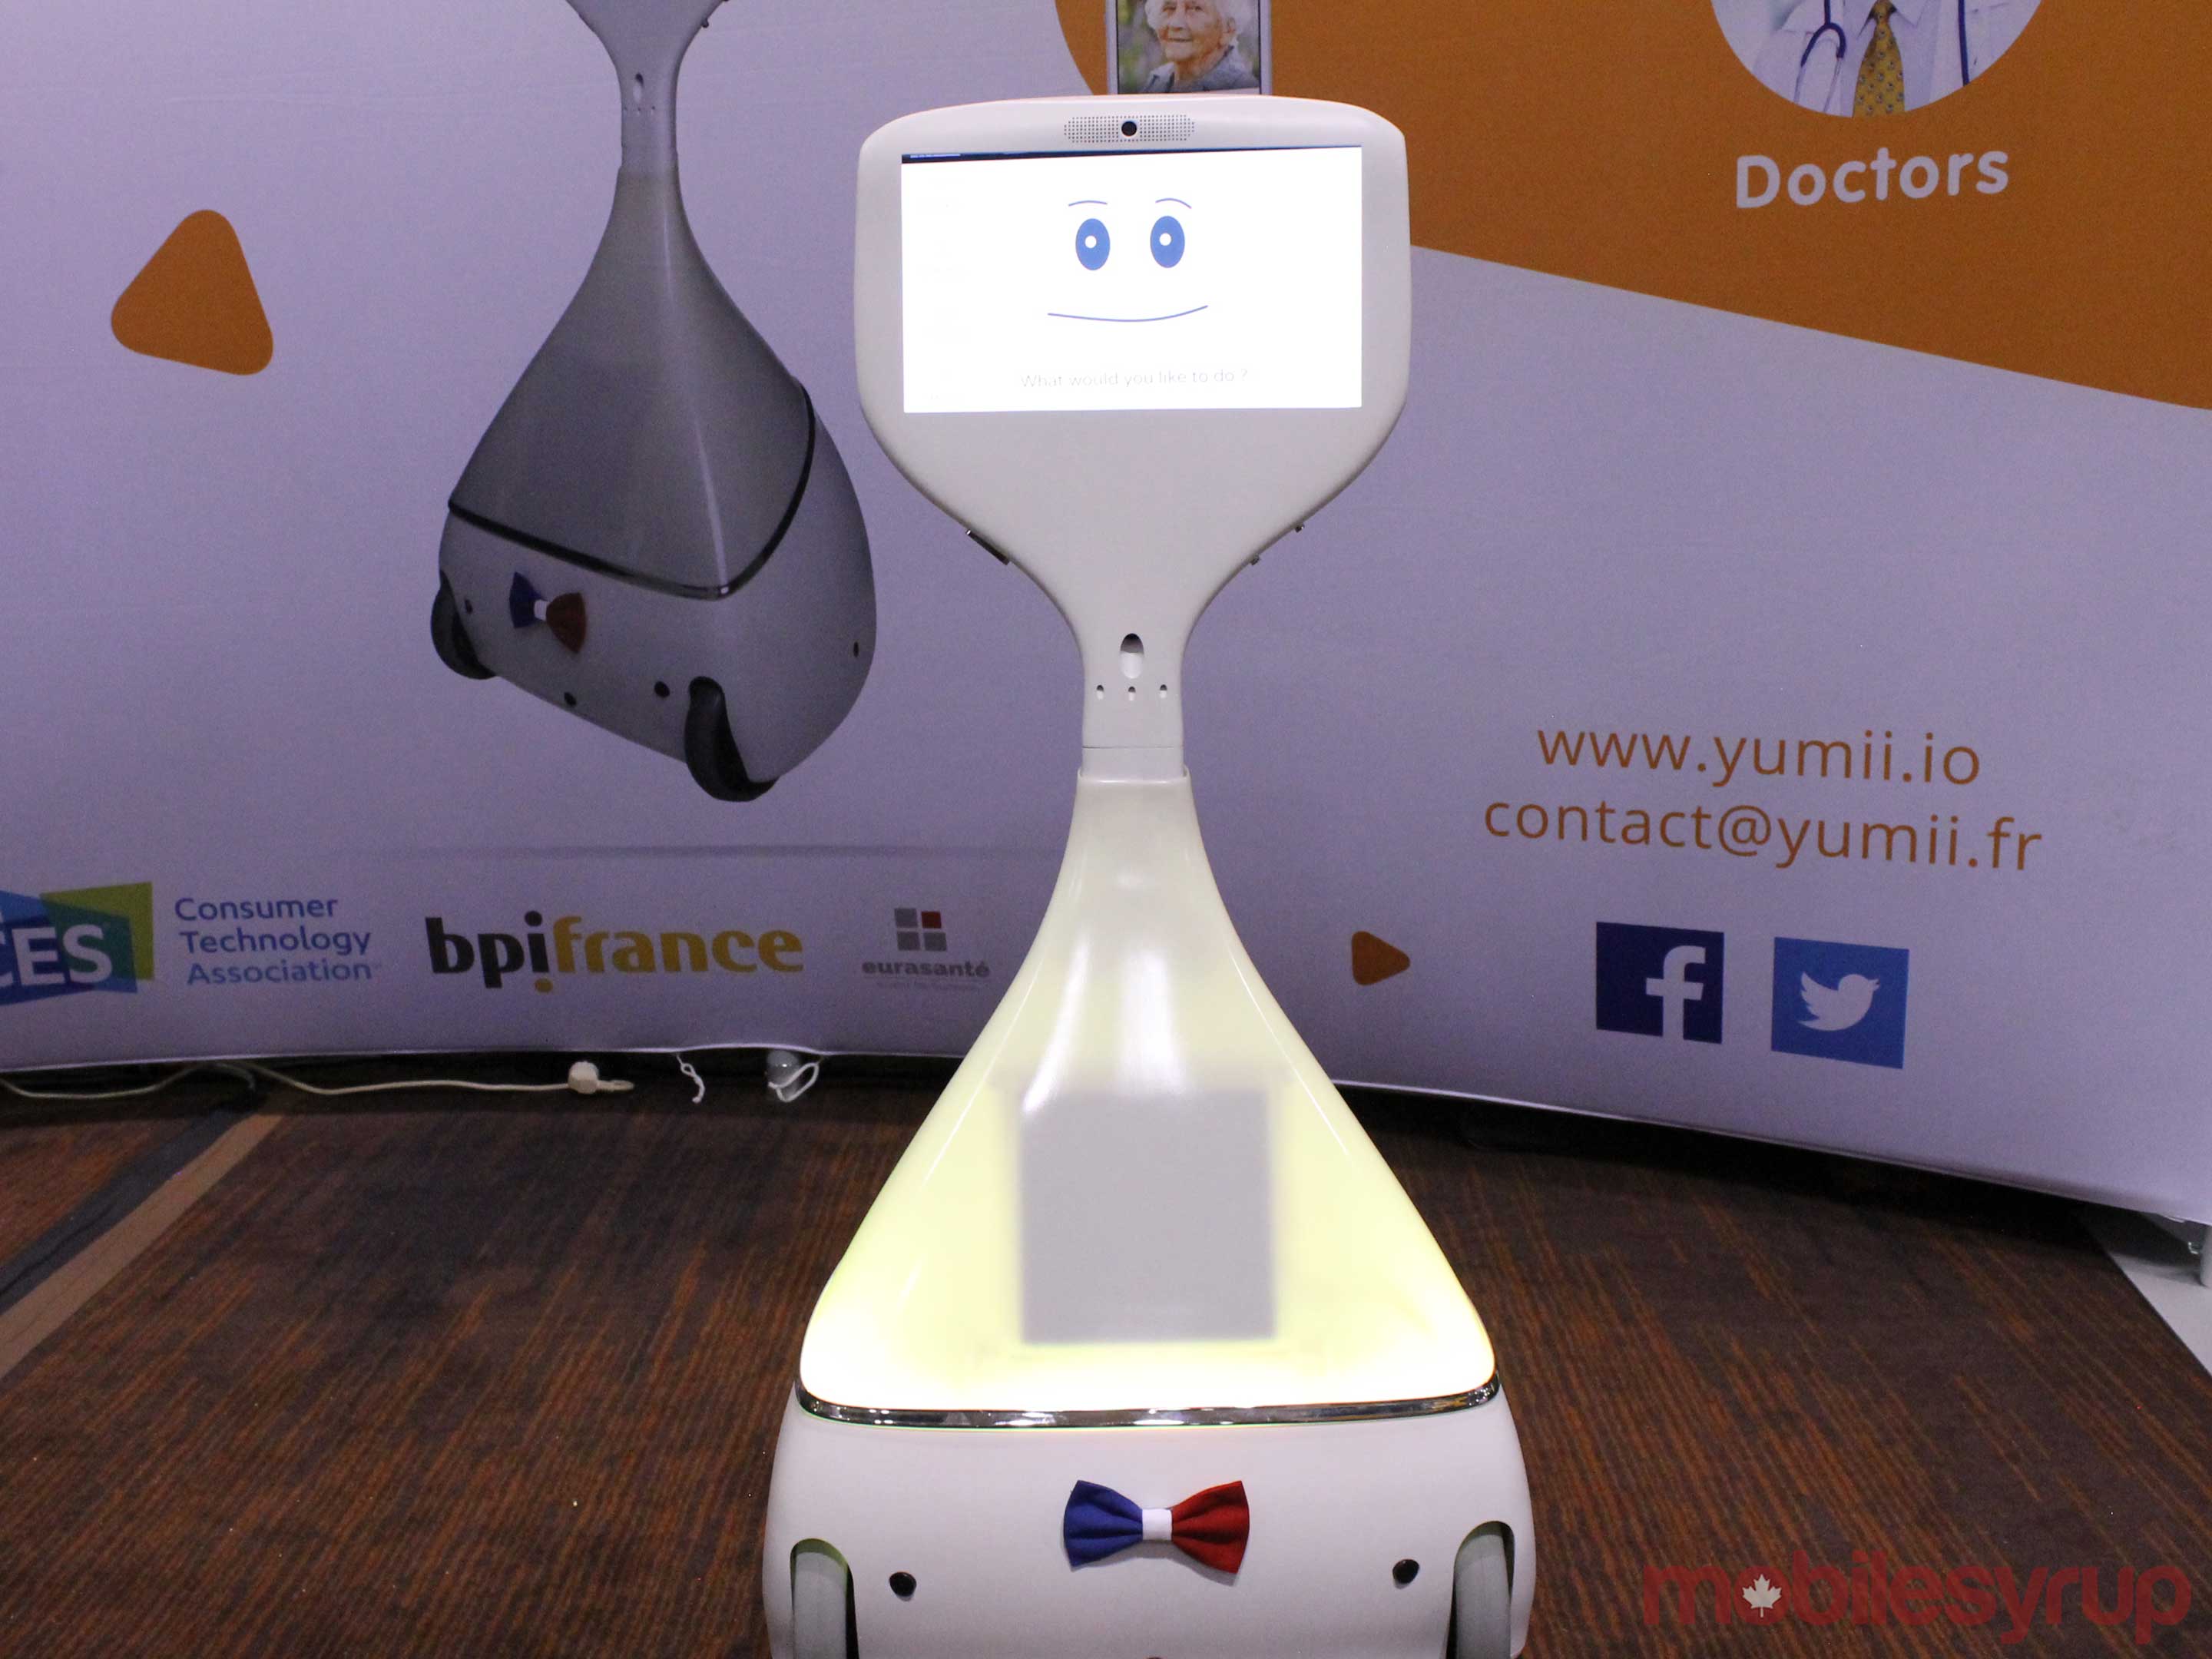 Cutii-from-Yumii-is-a-robot-that-will-take-care-of-the-elderly